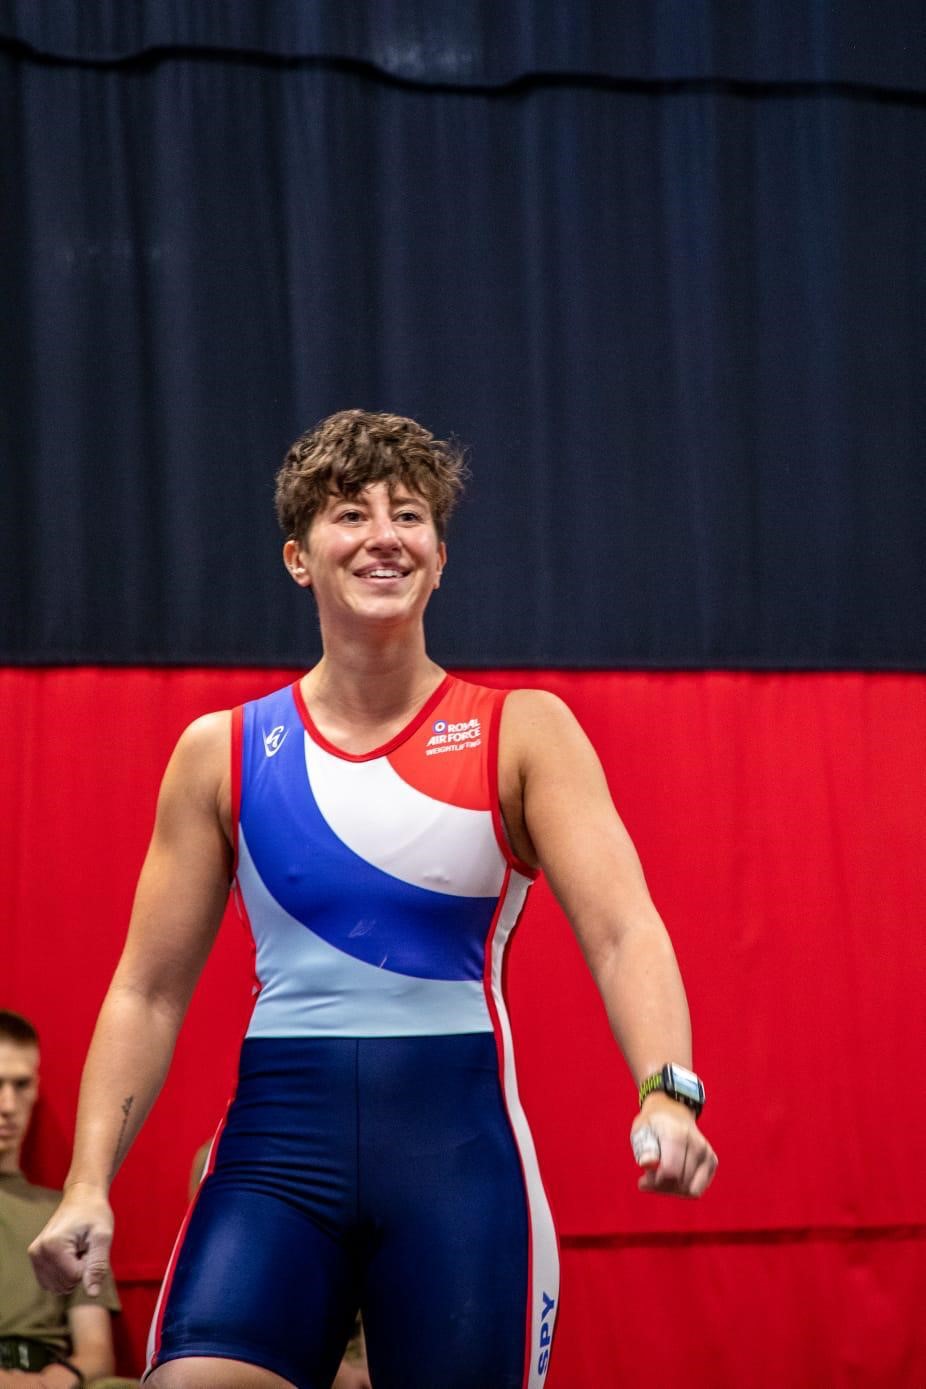 Cpl Lucy Spy a rising star among the RAF Weightlifting team